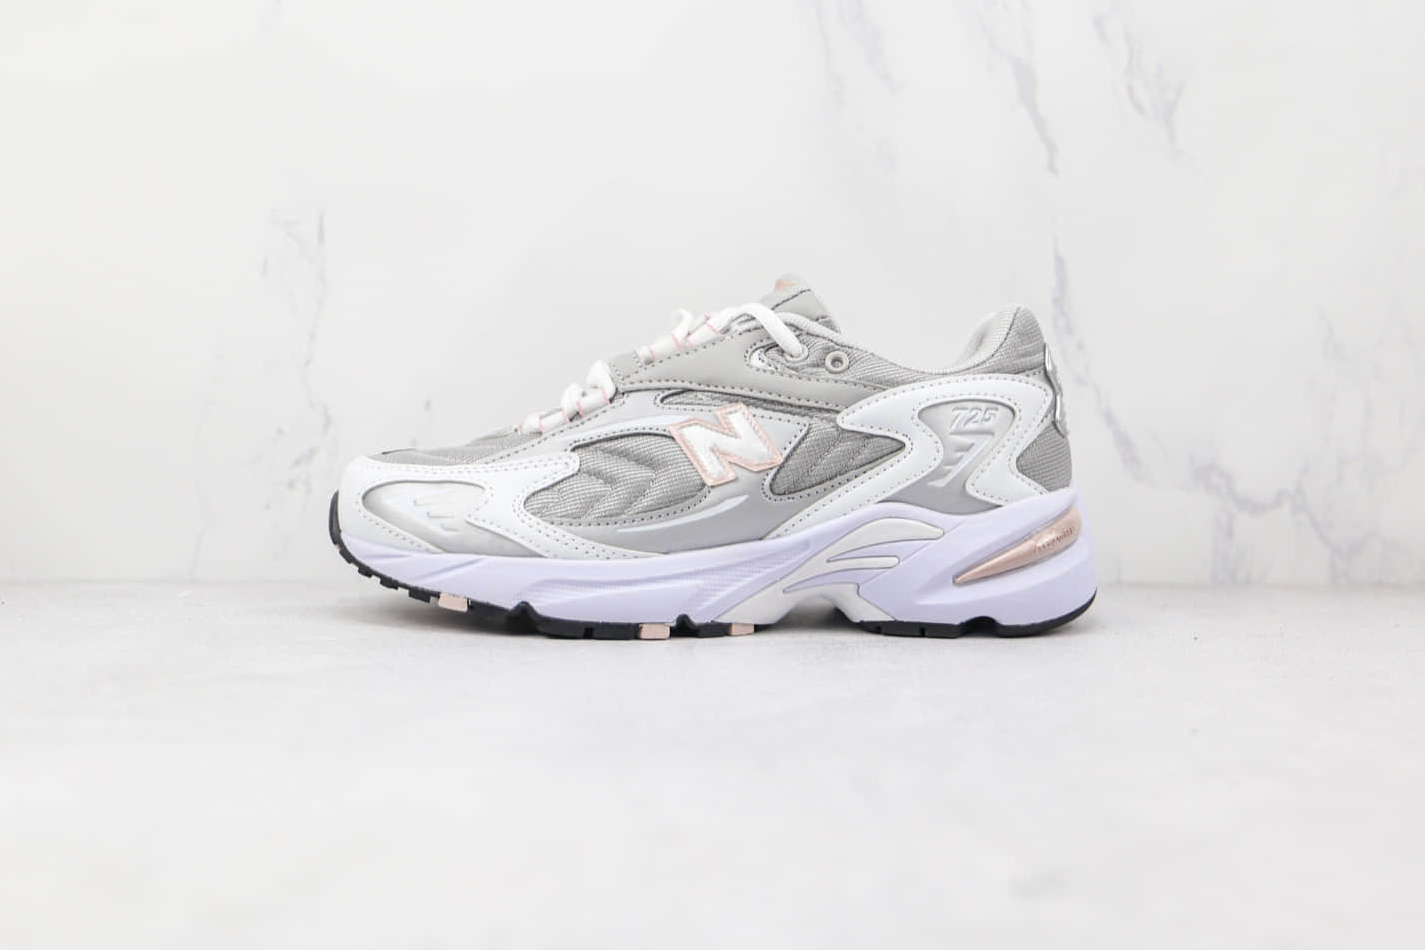 New Balance 725 Low Cut Silver Pink - Stylish and Comfortable Running Shoes